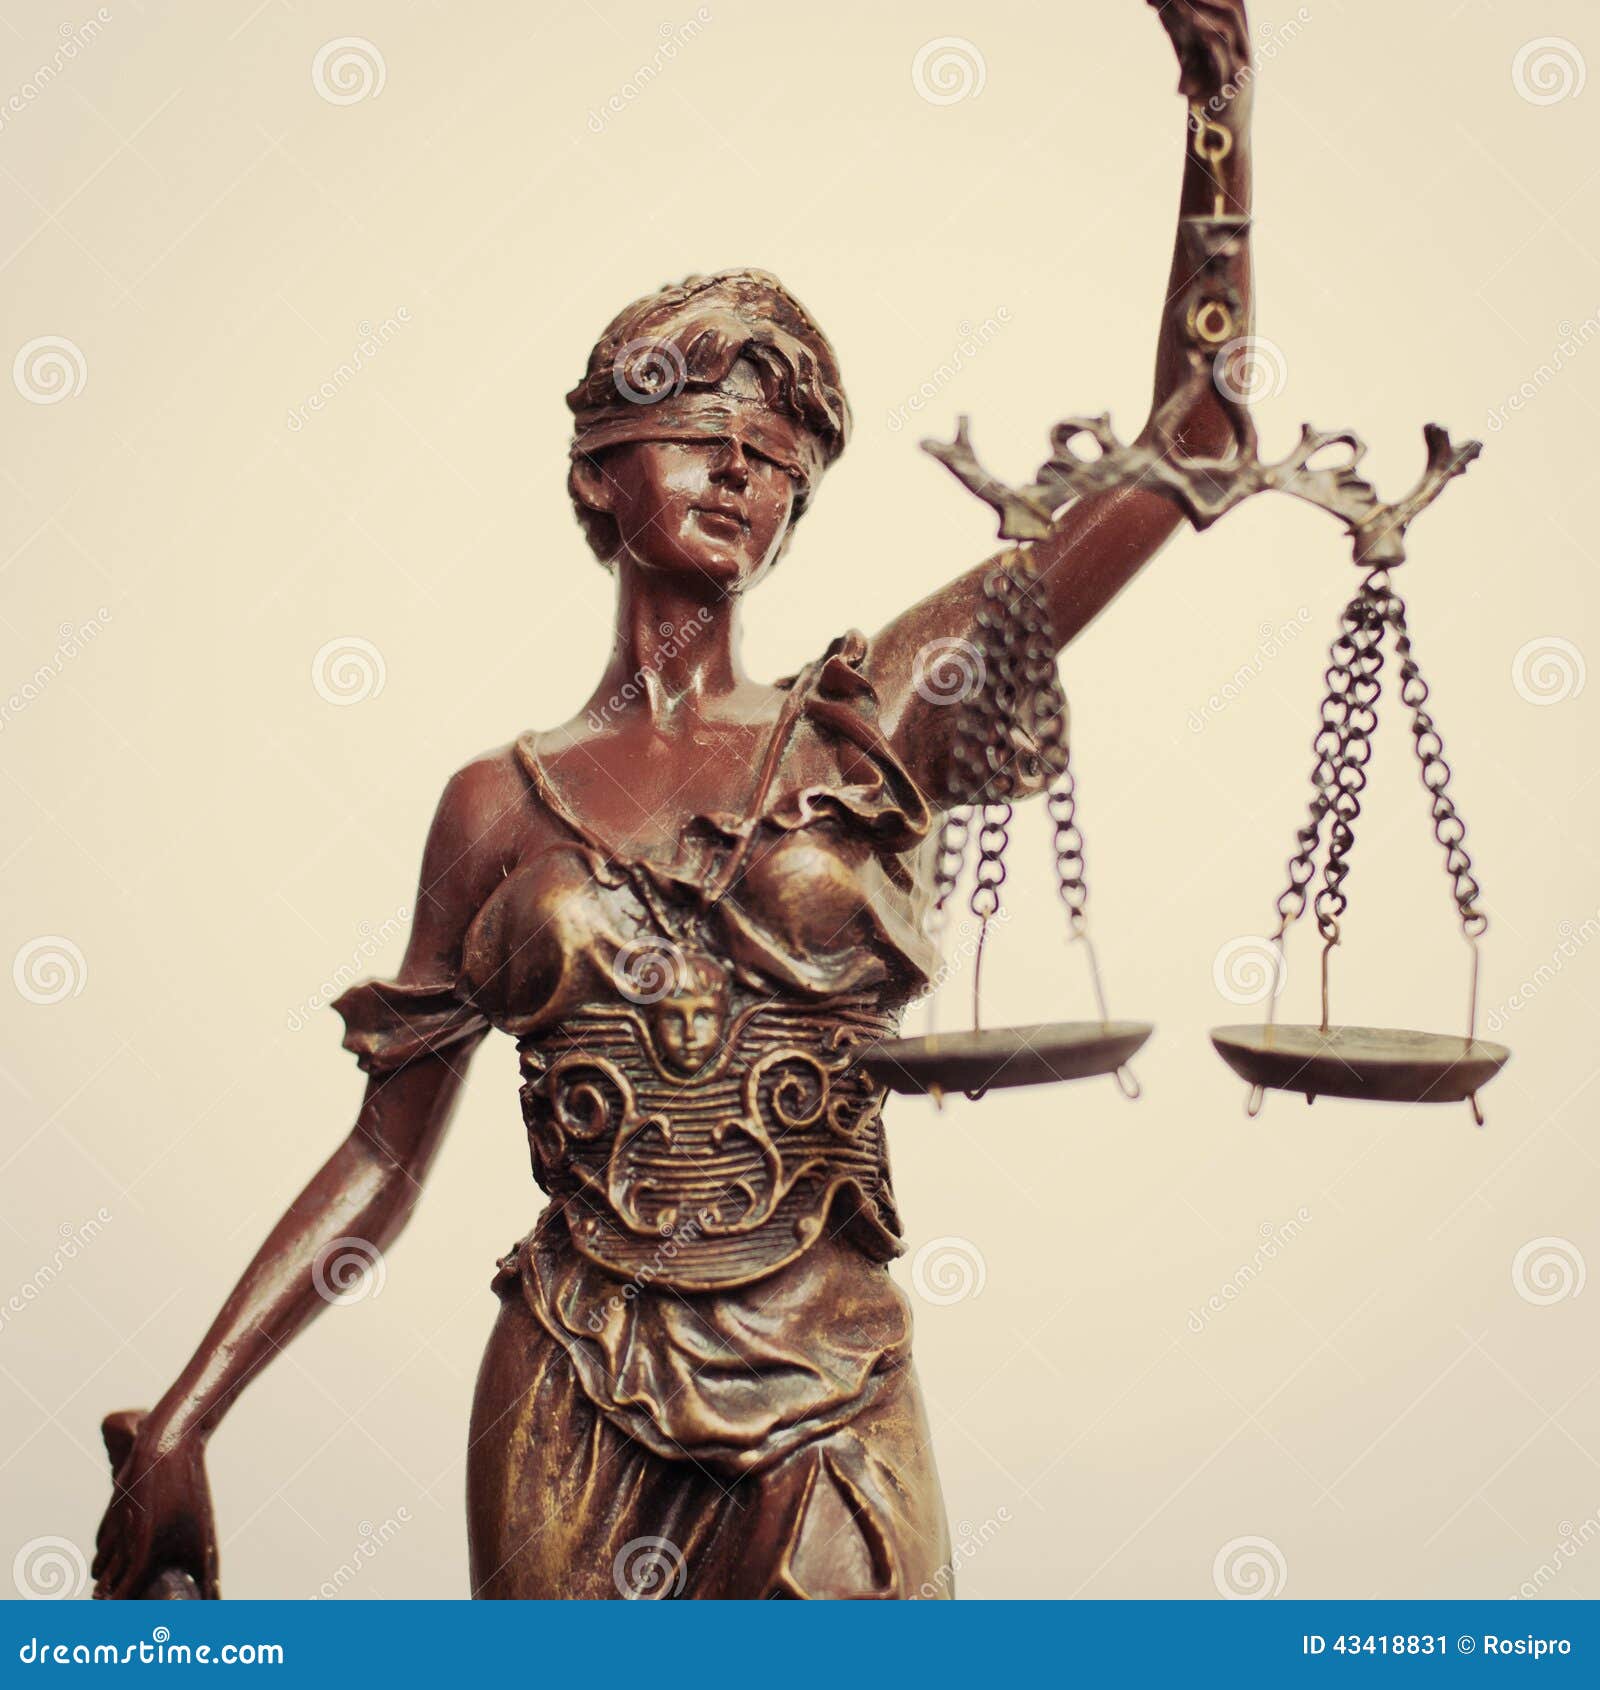 All 99+ Images what does the blindfold represent on lady justice Full HD, 2k, 4k